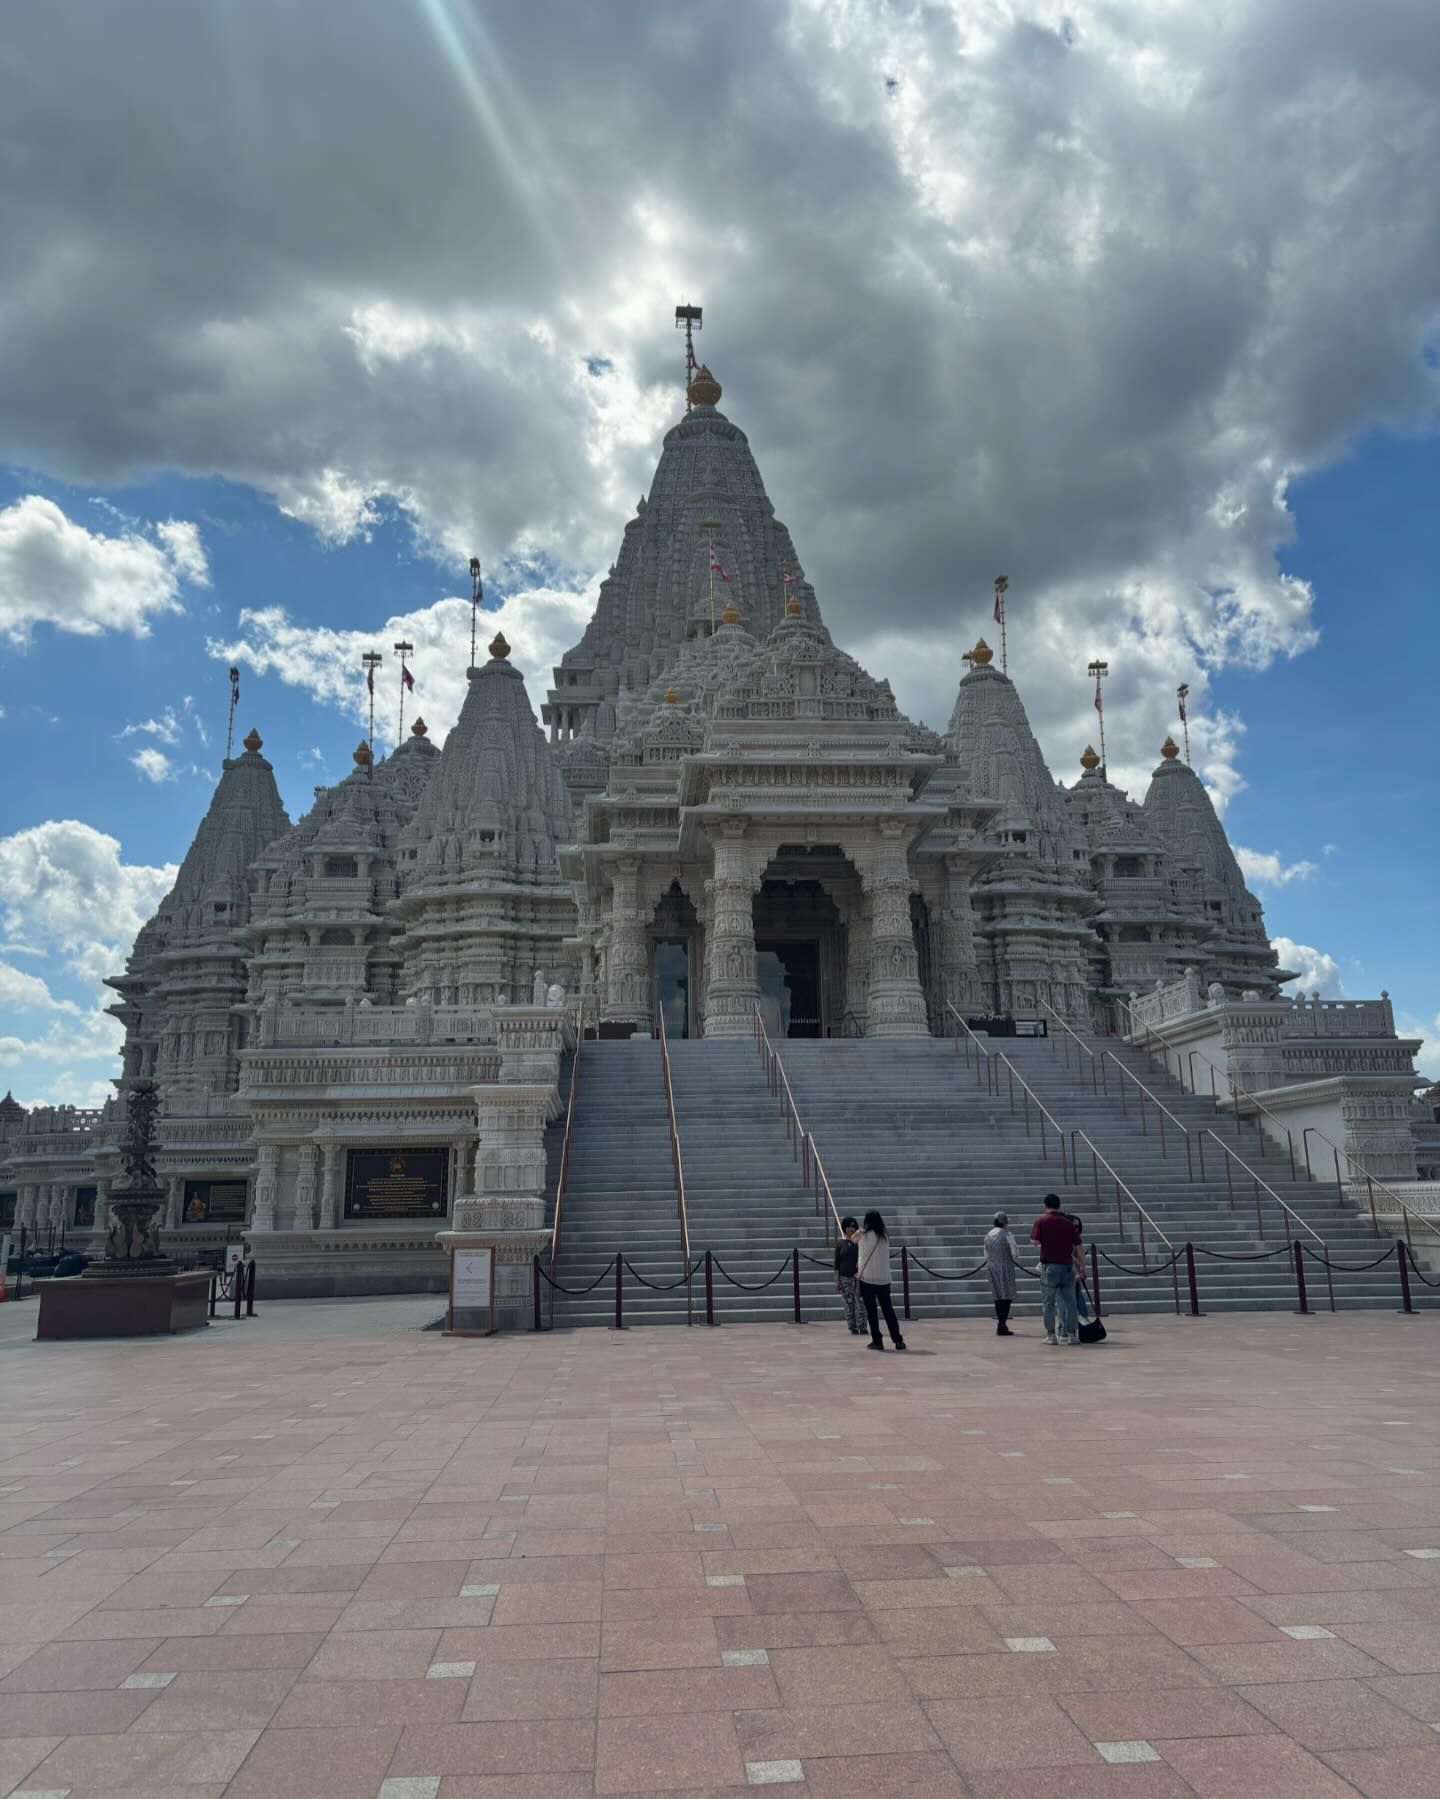 Spent the day exploring the Swaminarayan Akshardham with @briangmorris, located right in Robbinsville, NJ.
Neither words nor pictures can accurately explain the beauty of this place. The atmosphere is peaceful and inviting. Check it out if you’re close by and learn ya’s a little something 🕉️